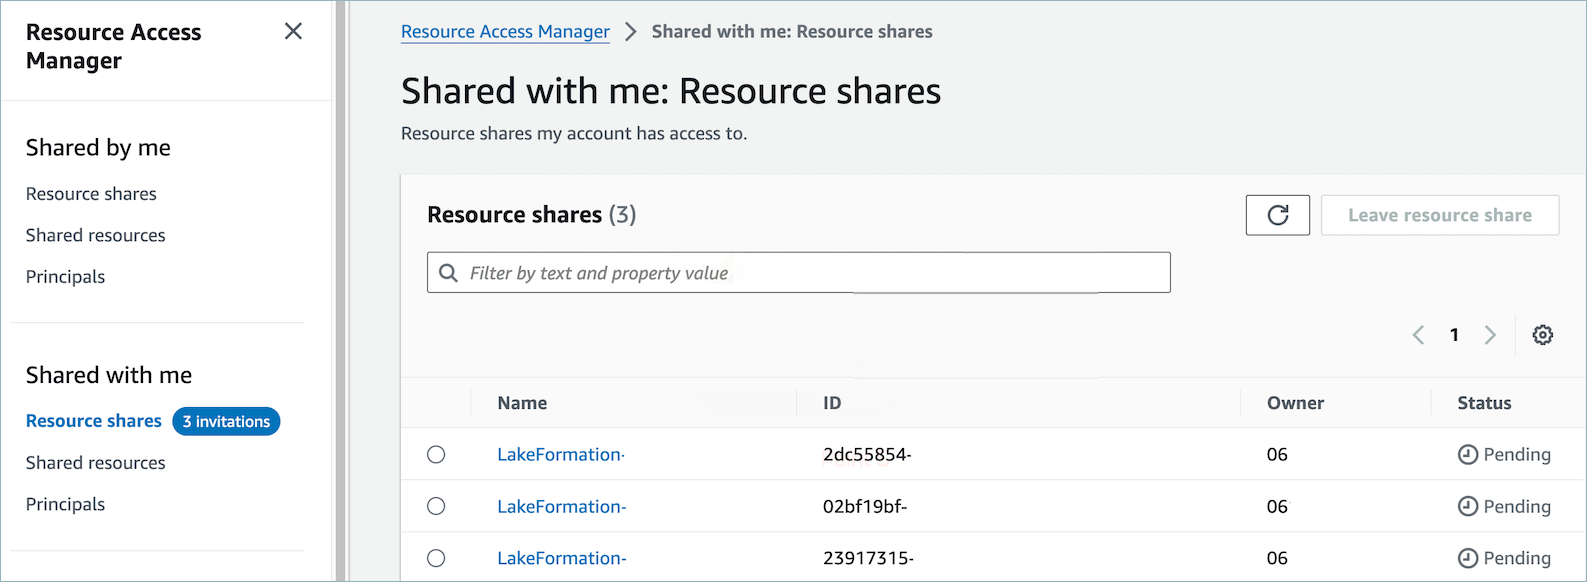 Shared with me - resource shares table.